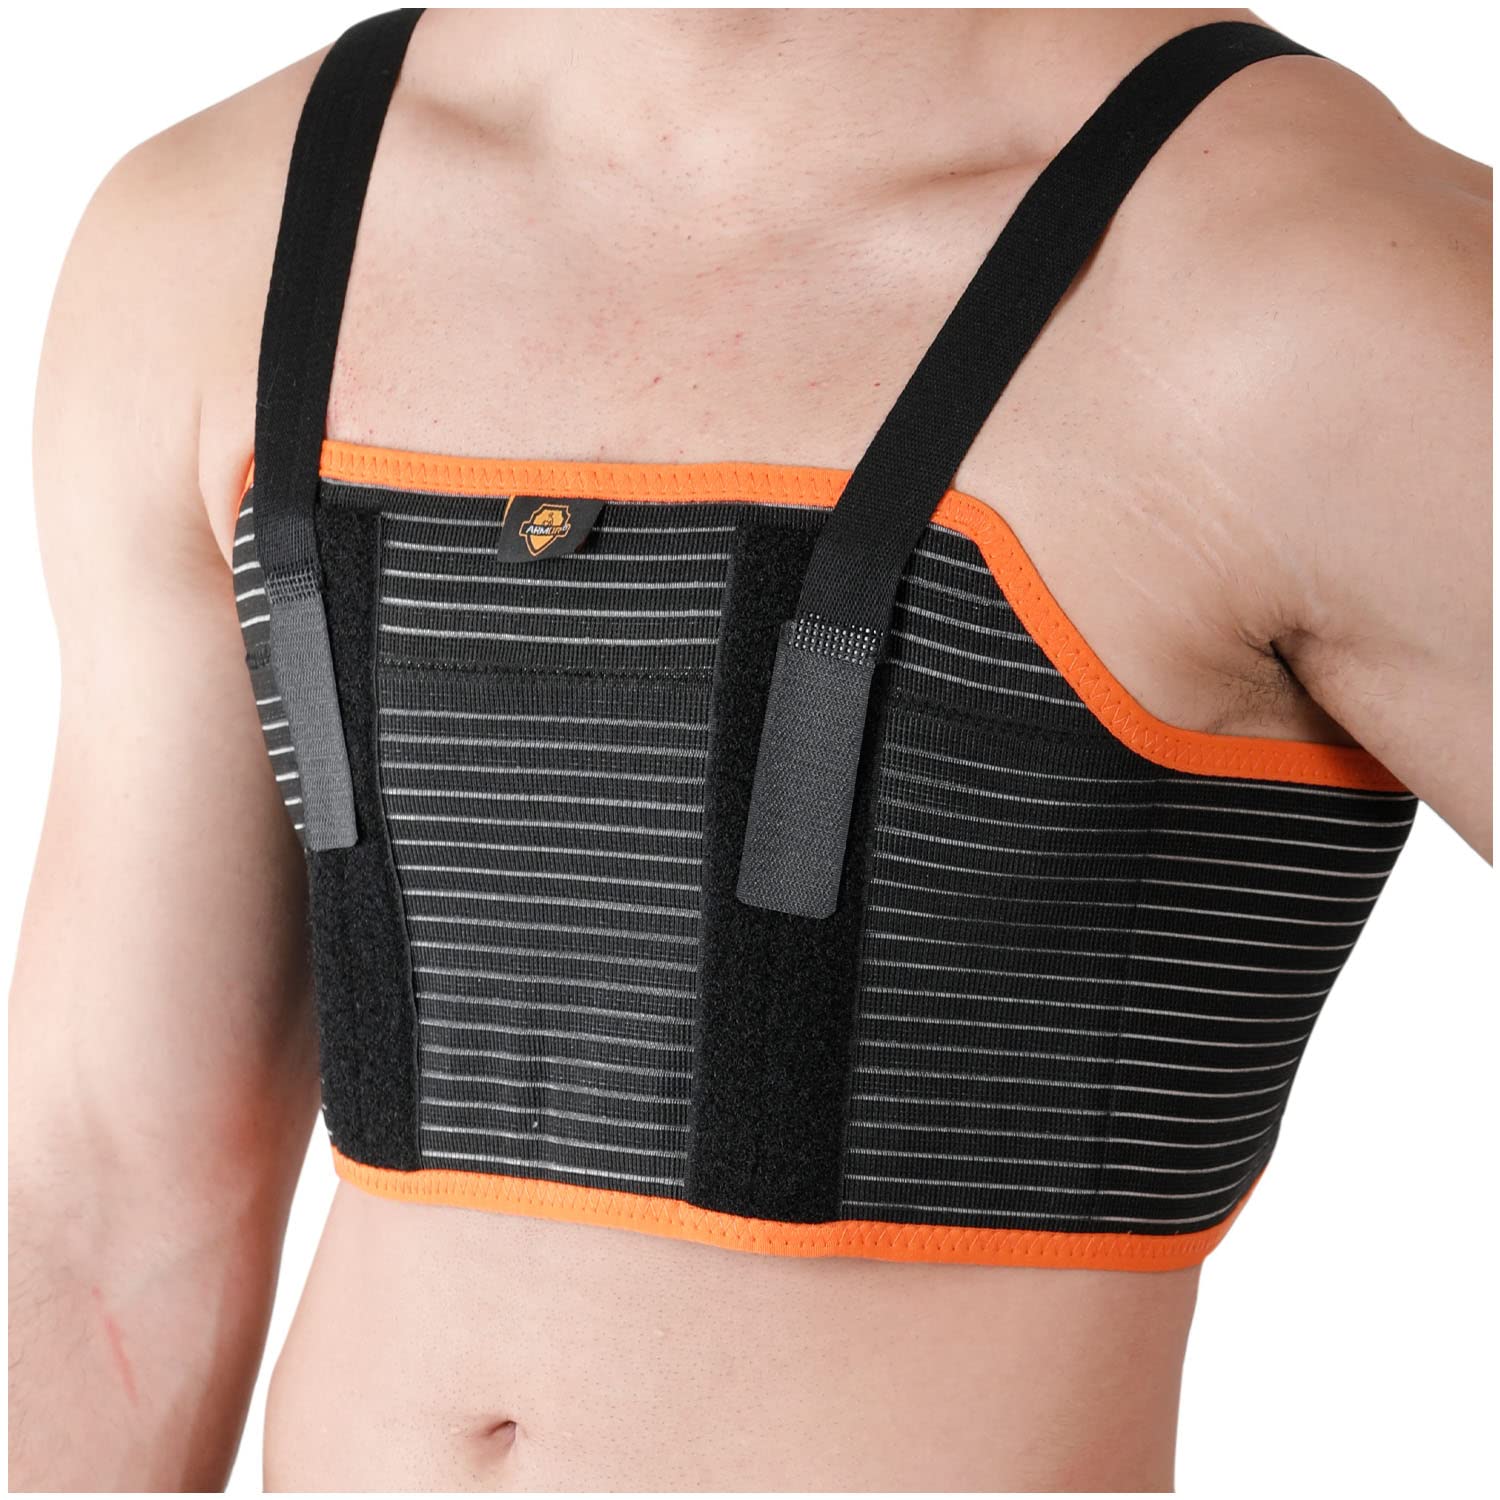 Armor Adult Unisex Chest Support Brace with 2 Metal Inserts to Stabilize  the Thorax after Open Heart Surgery Thoracic Procedure or Fractures of the  Sternum or Rib Cage Black Color Size Medium